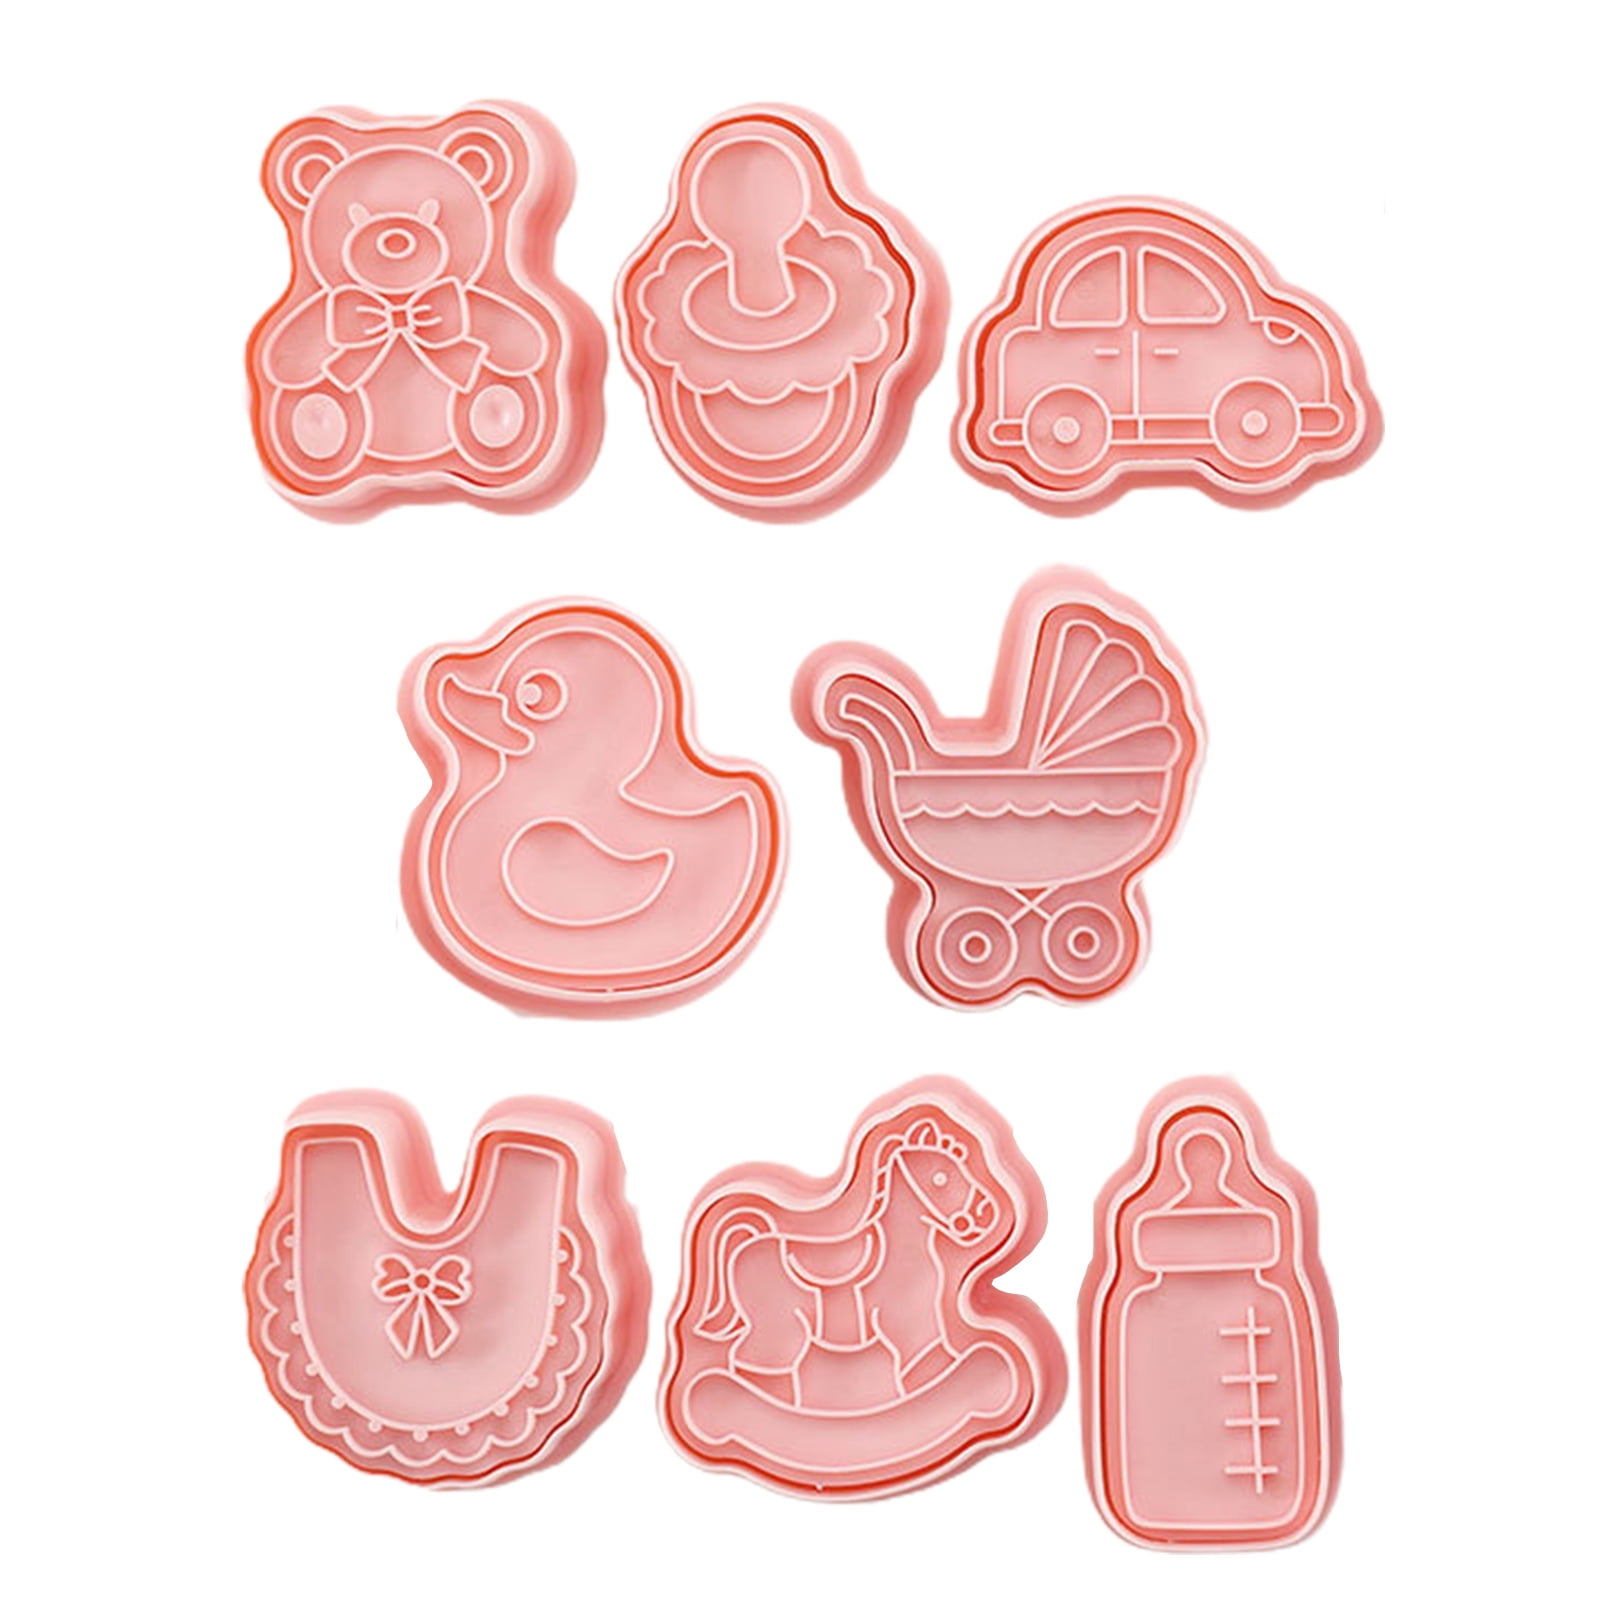 Baby Mobile Cookie Cutter Baby Shower Cookie Cutter Shower Cookie 3D  Printed Cookie Cutter TCK32129 